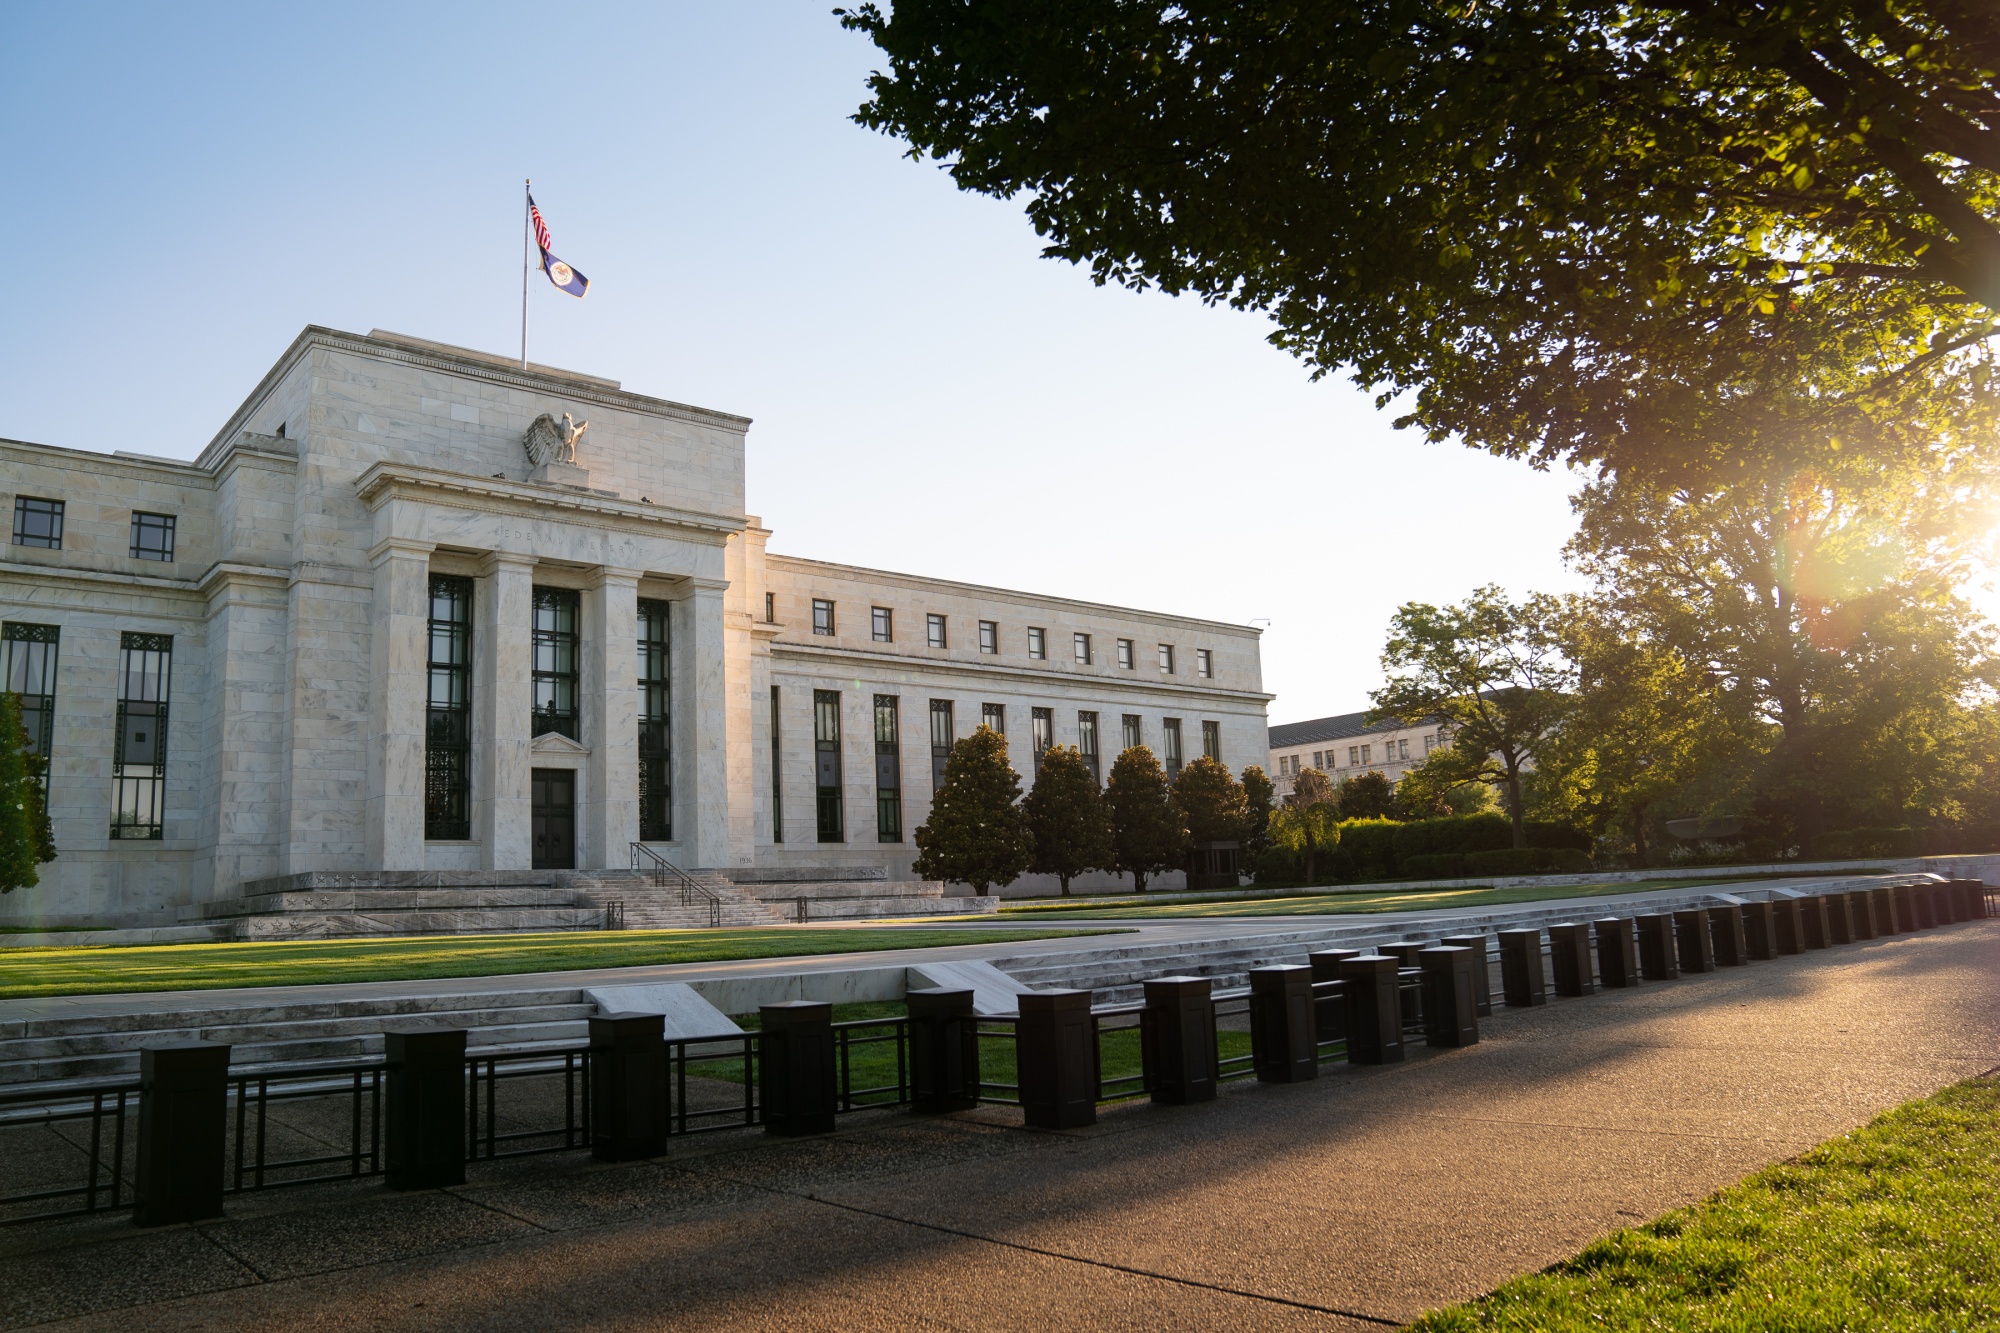 The Marriner S. Eccles Federal Reserve building in Washington, D.C., U.S., on Aug. 18.